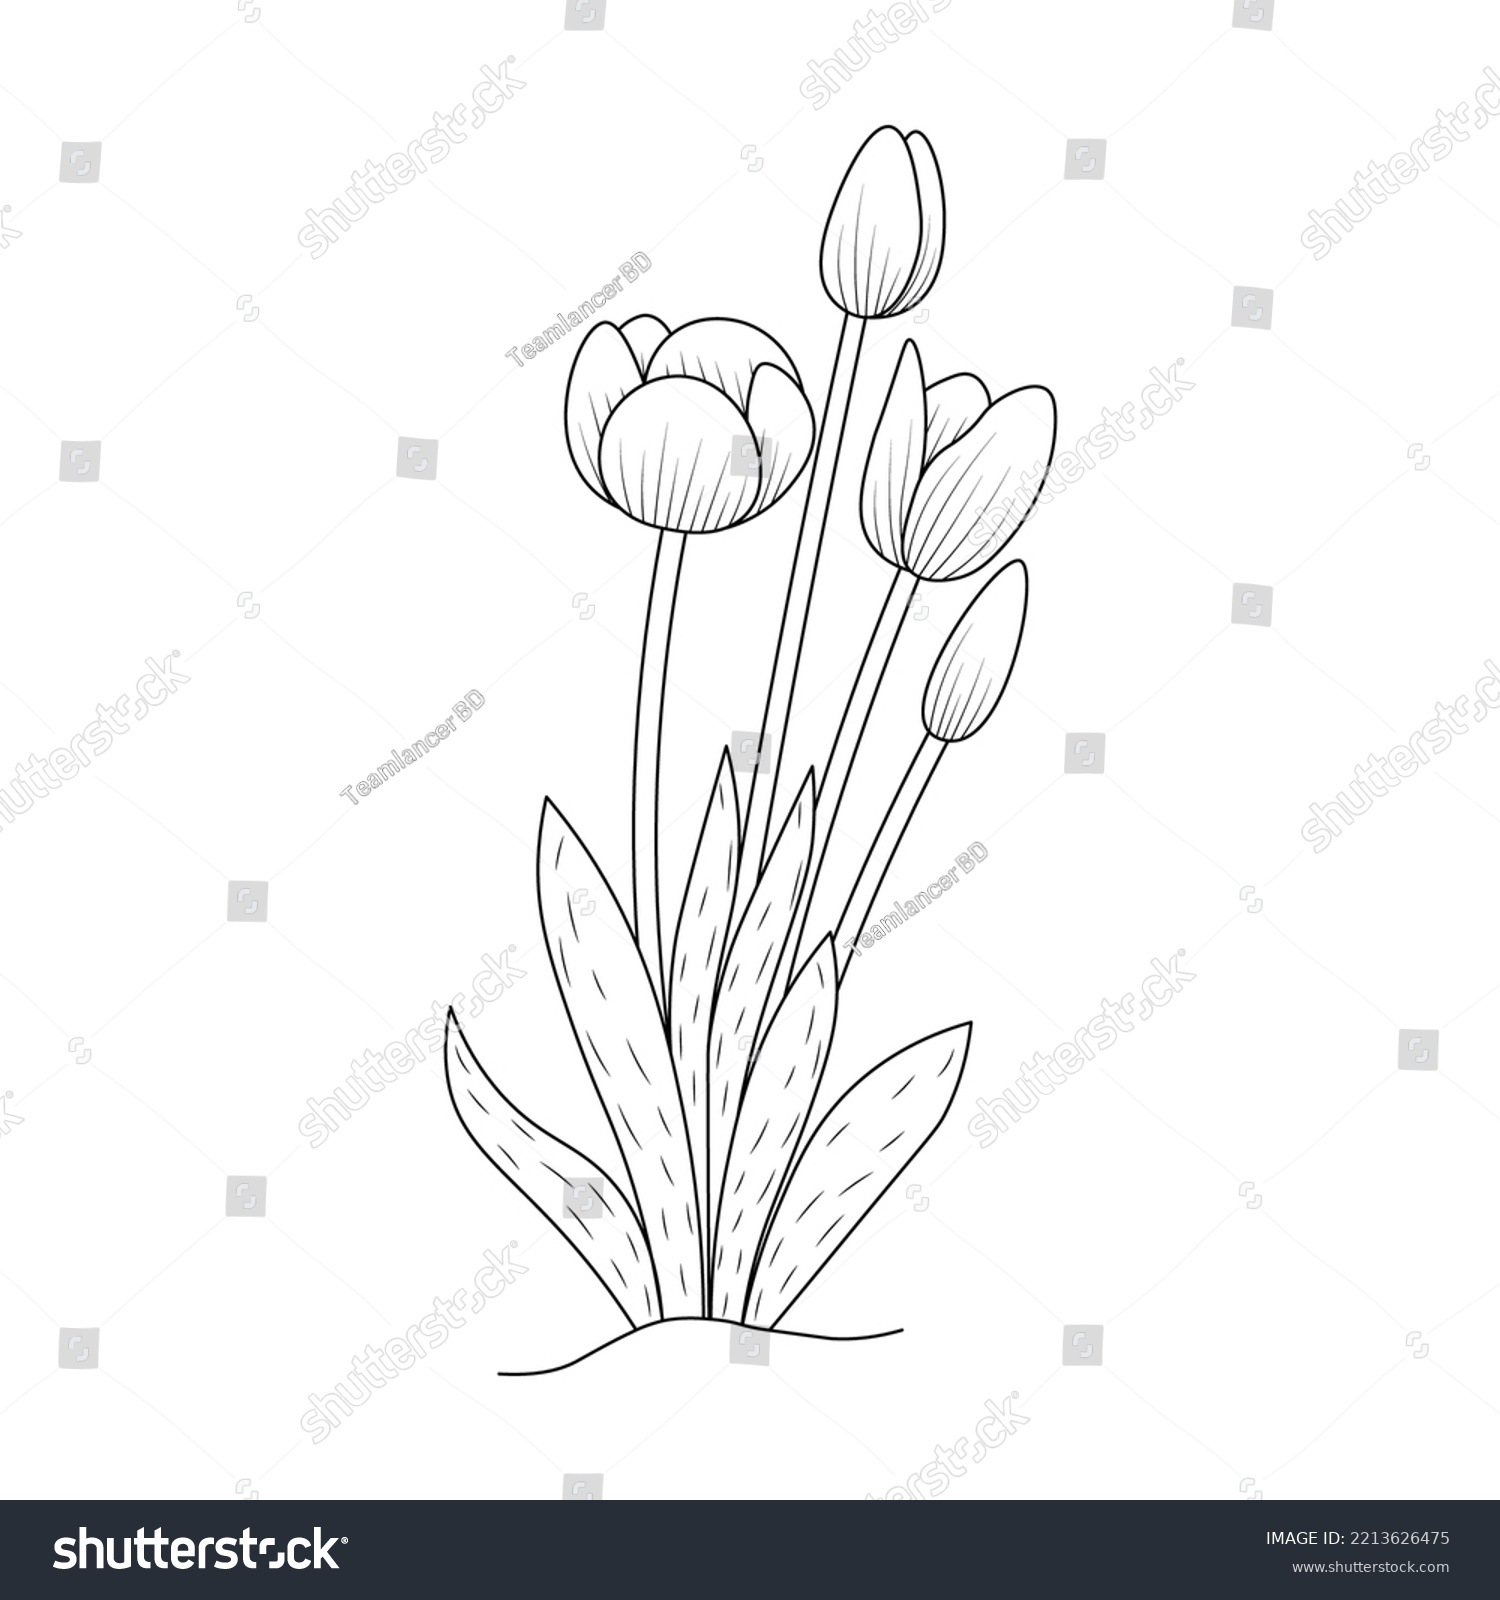 Tulip flower coloring page design book stock vector royalty free